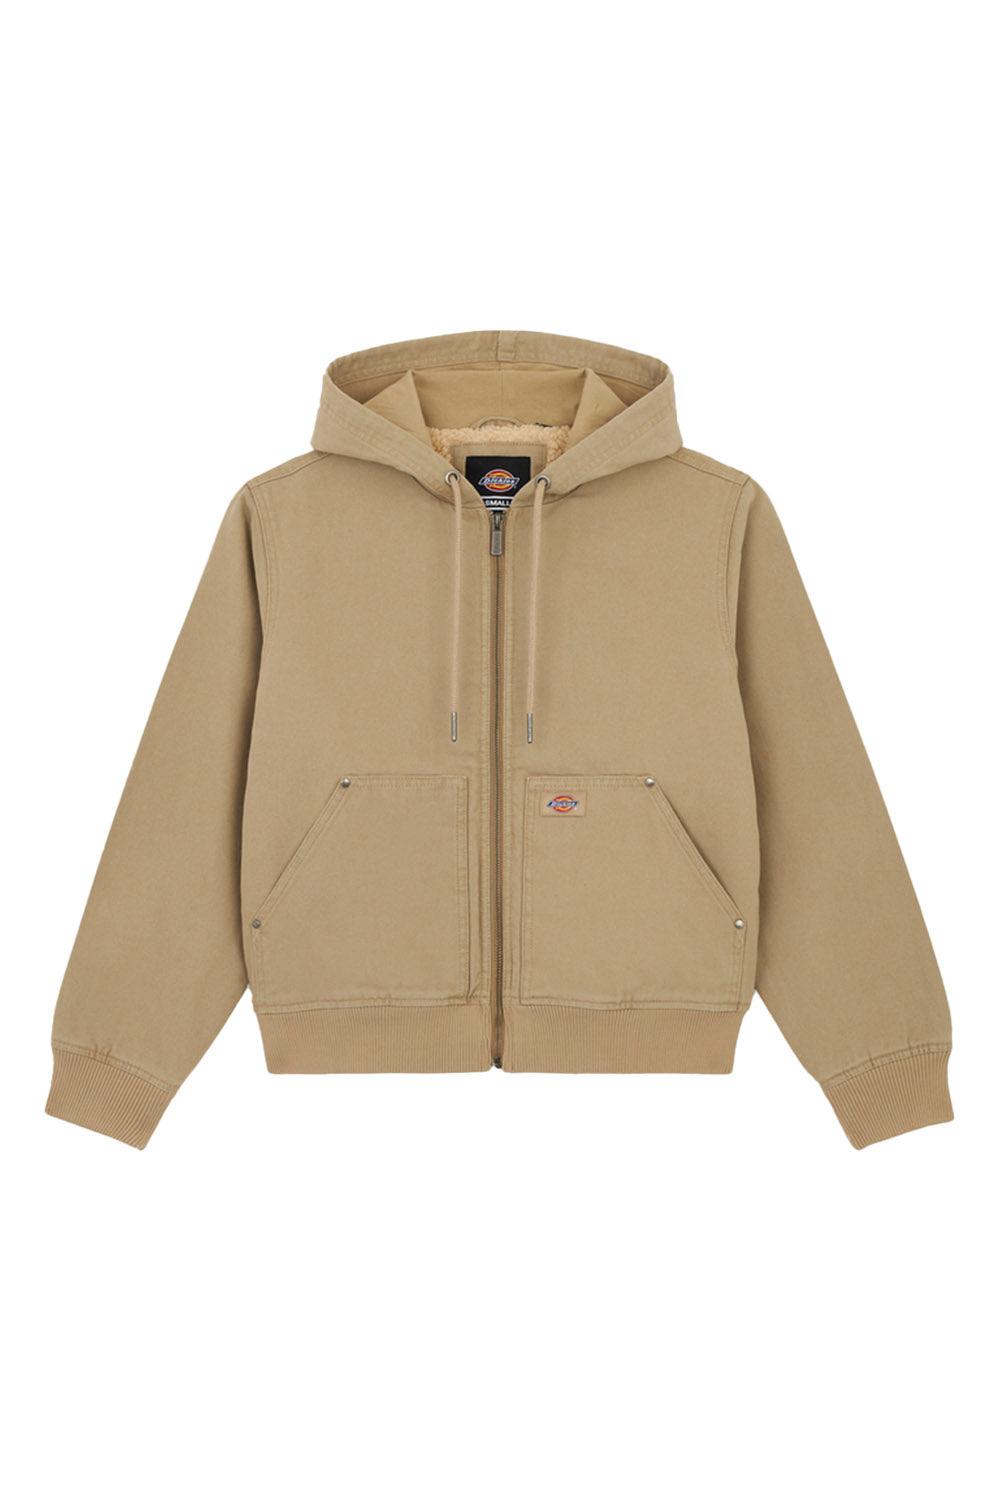 Dickies | Duck Canvas Sherpa Lined Desert Sand | Milagron